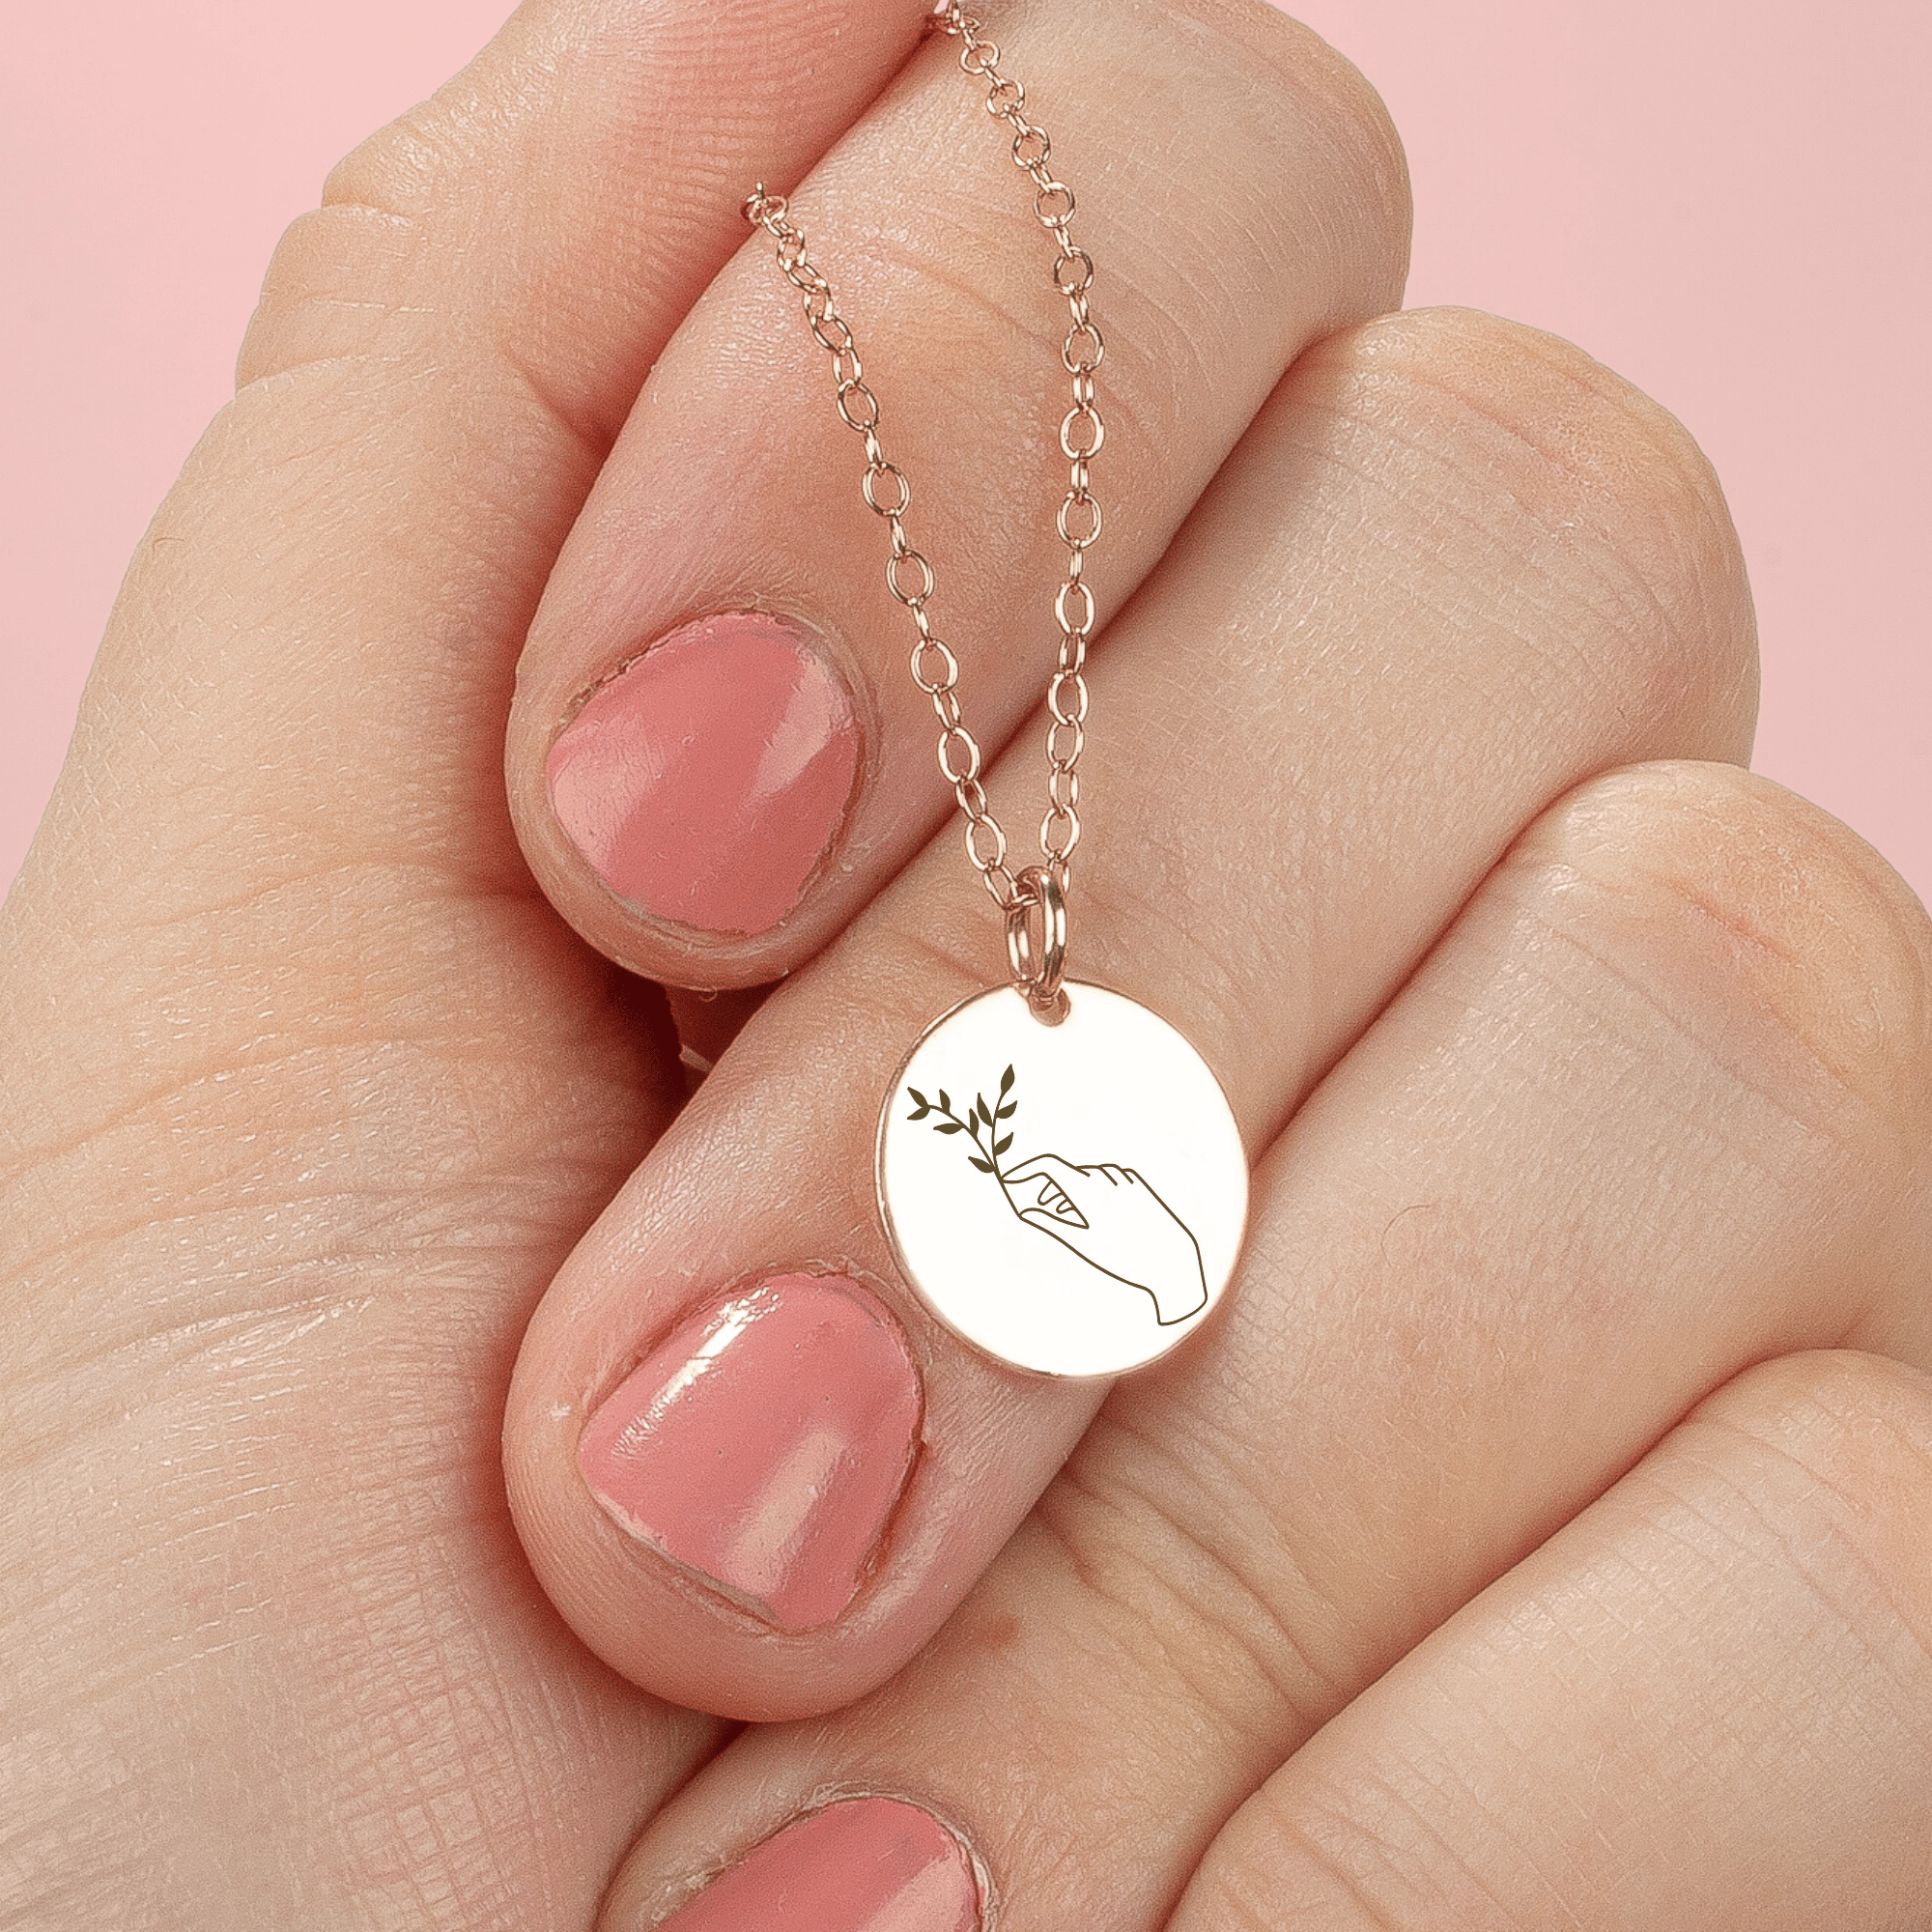 Lady of the Forest Necklace - Melanie Golden Jewelry - Engraved Jewelry, flora, minimal minimal necklace, minimal necklace, mystic, necklace, necklaces